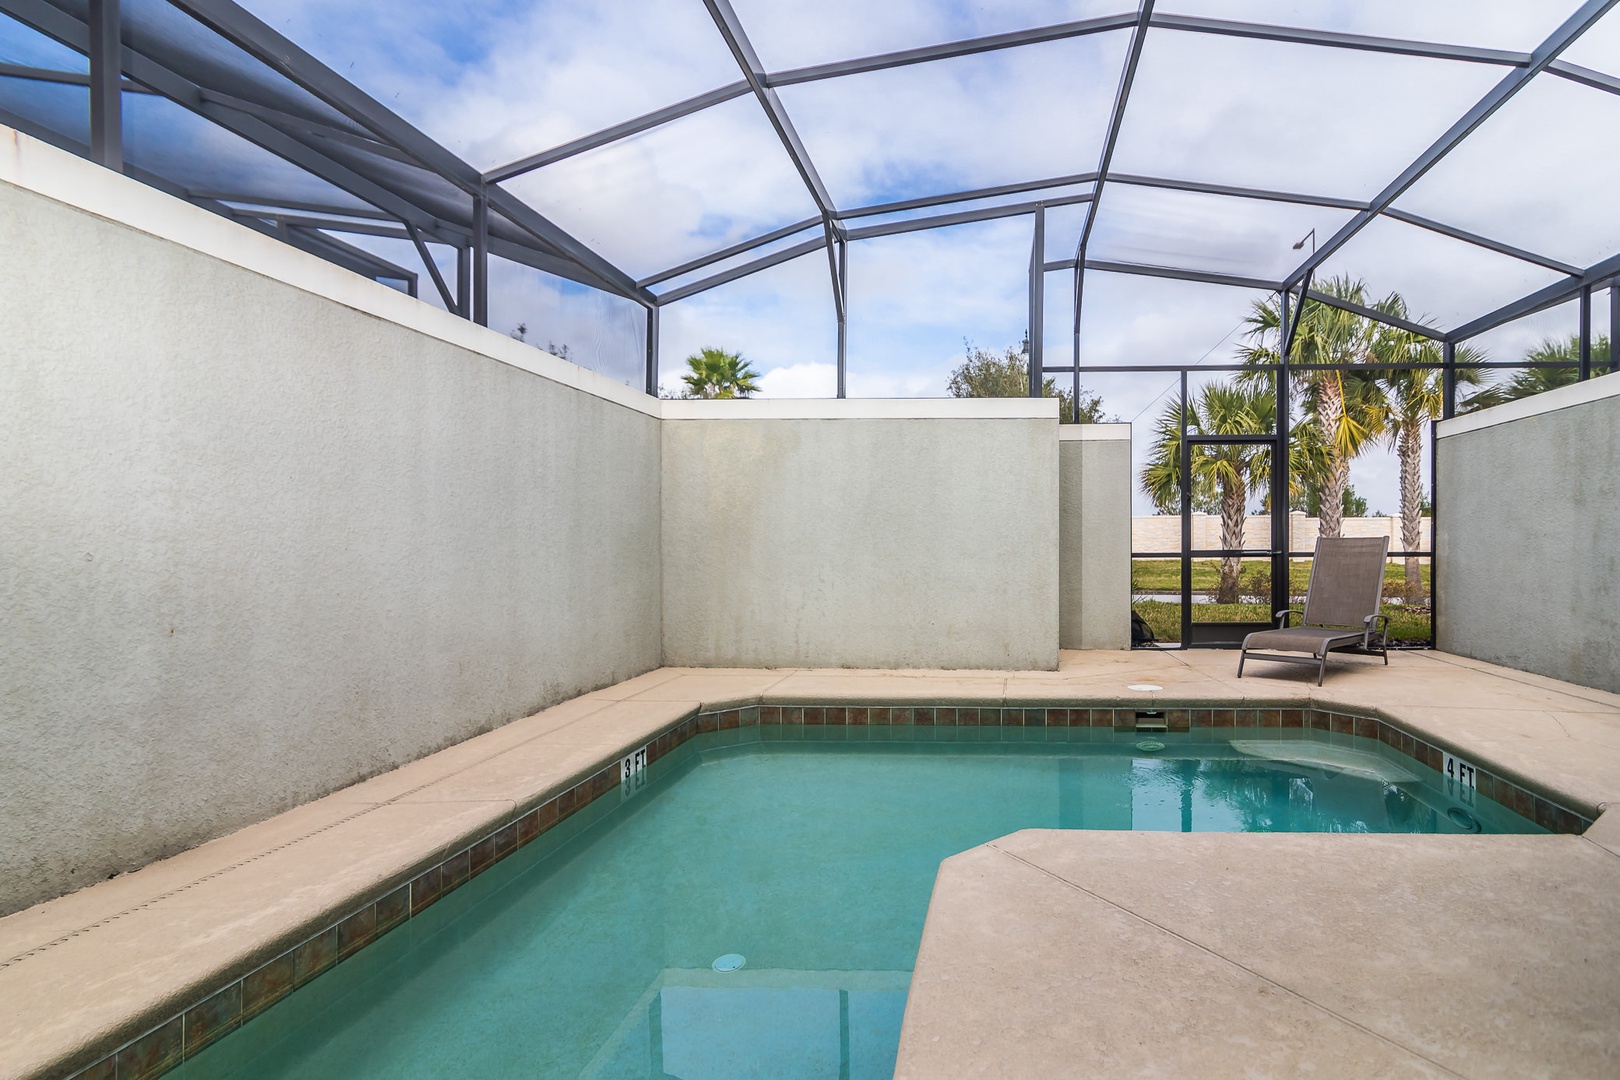 Private small screened pool